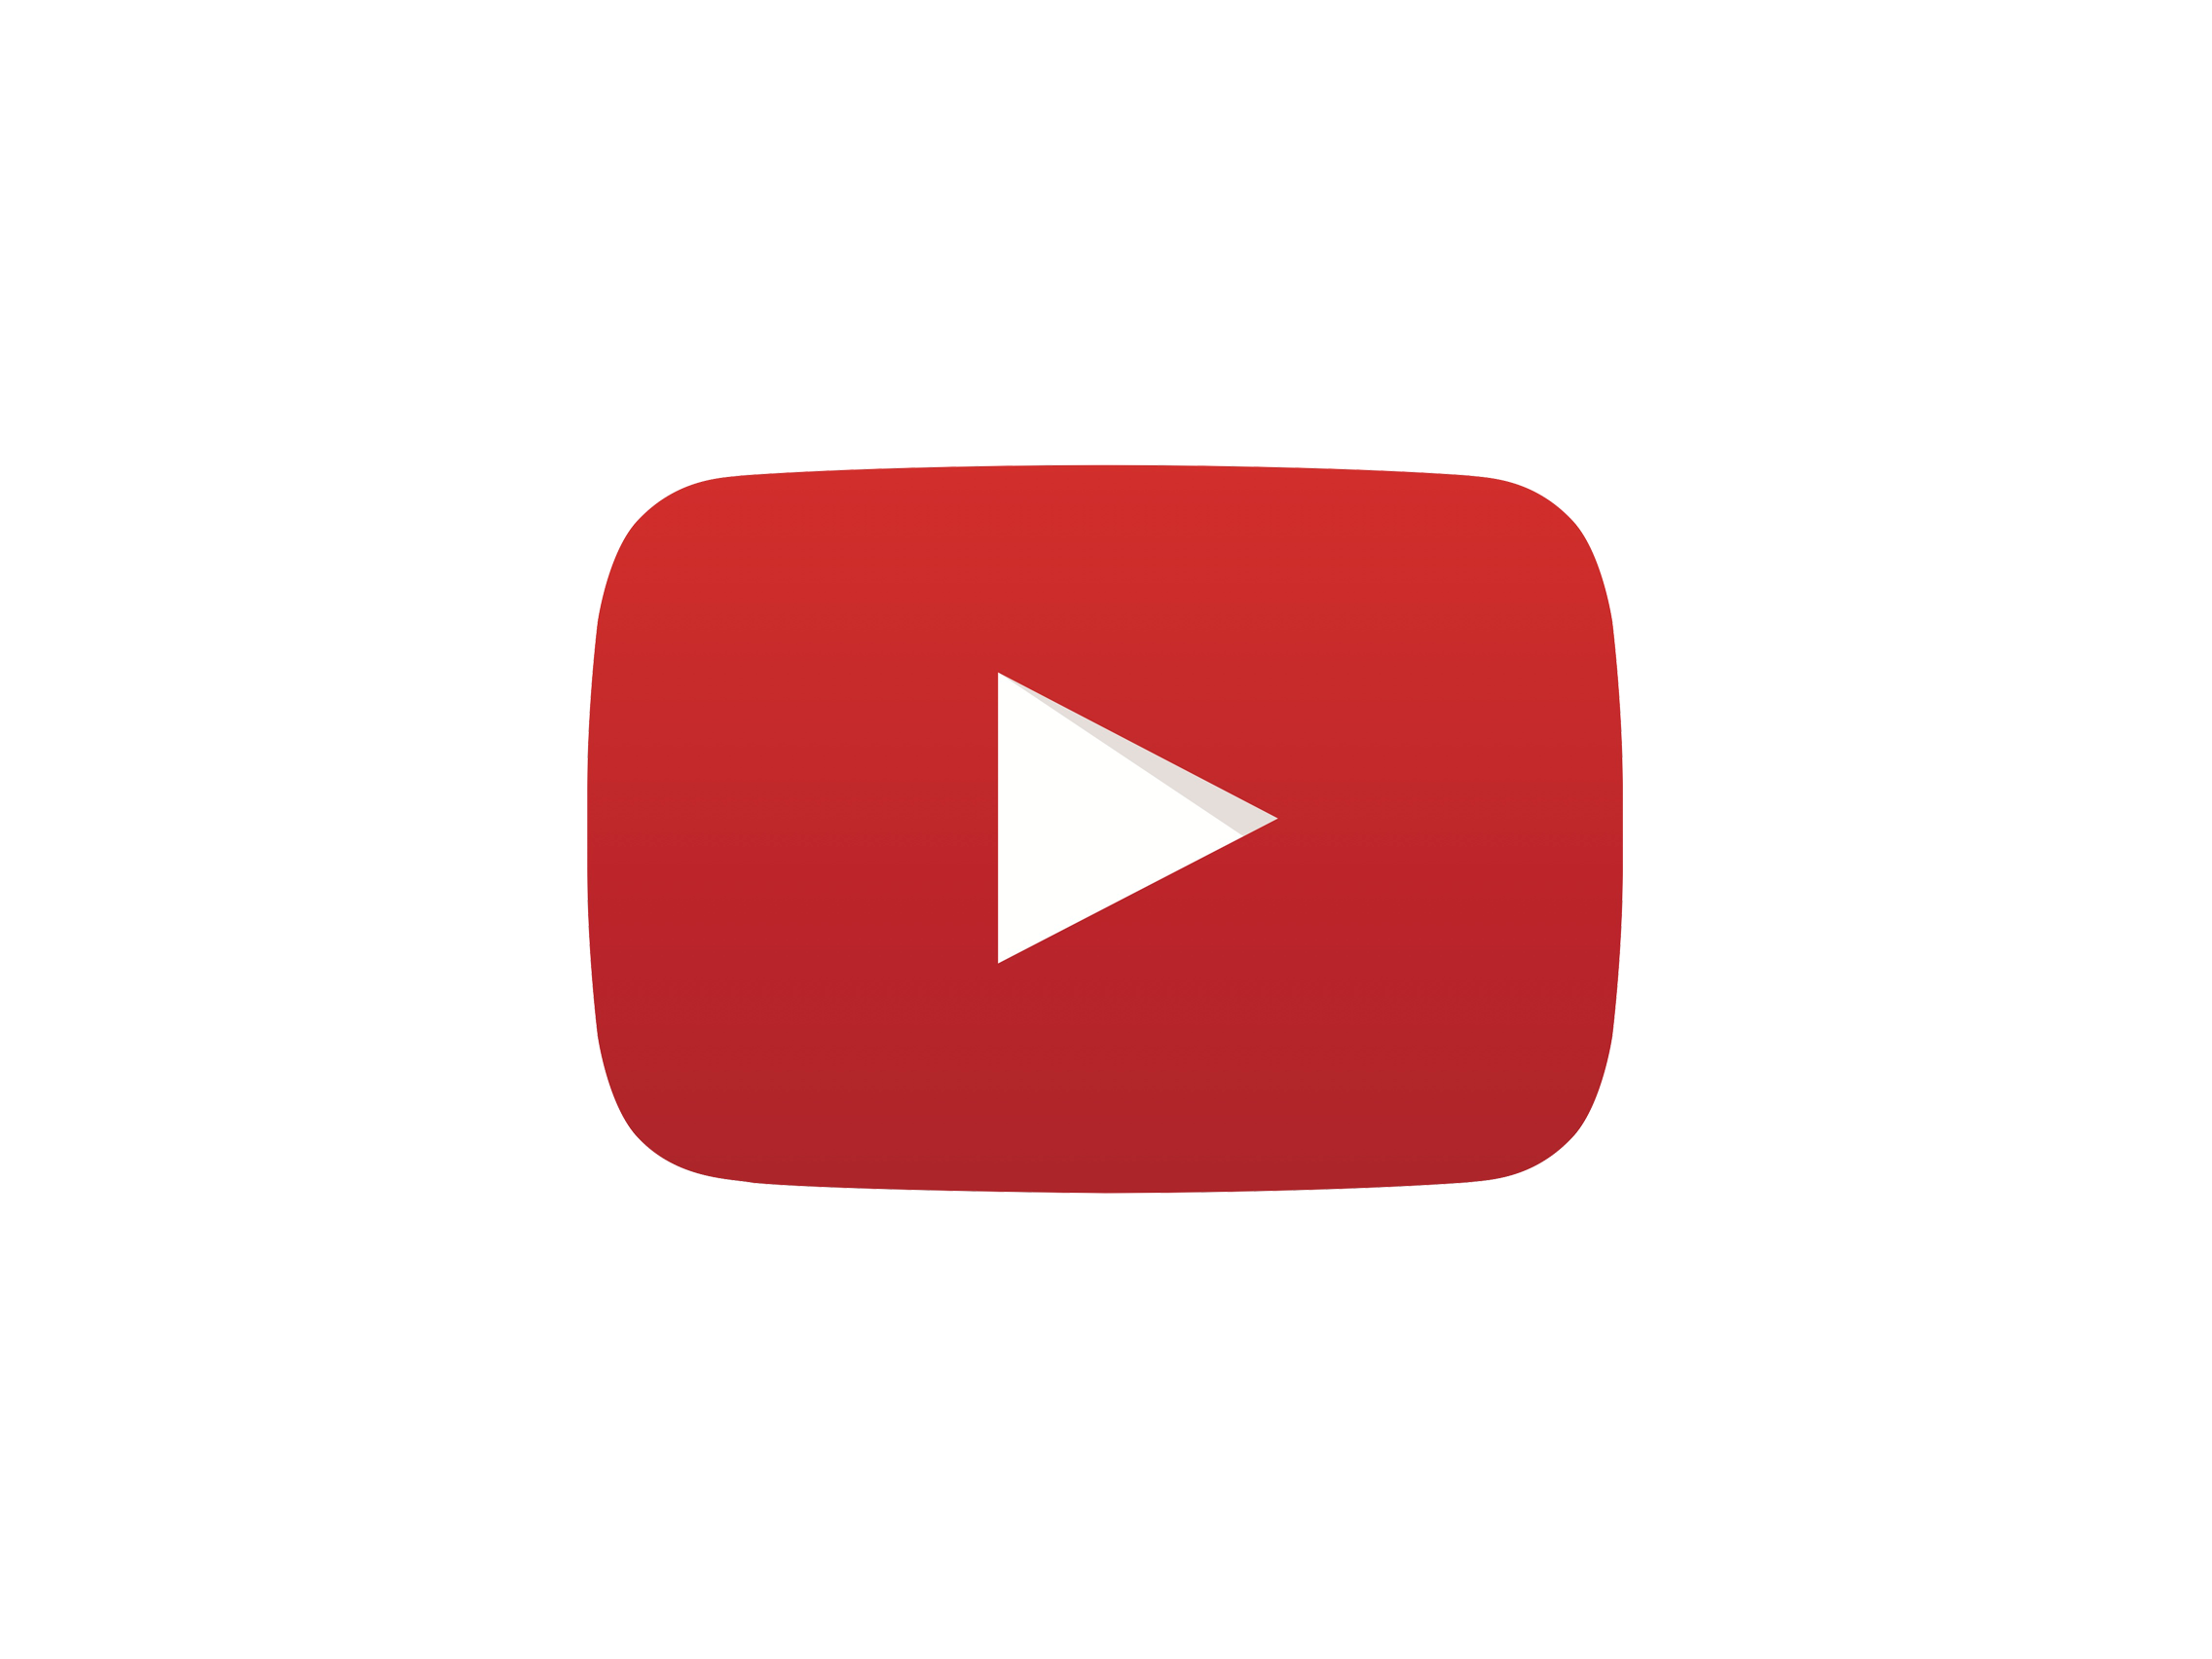 Youtube PNG Transparent Images | PNG All